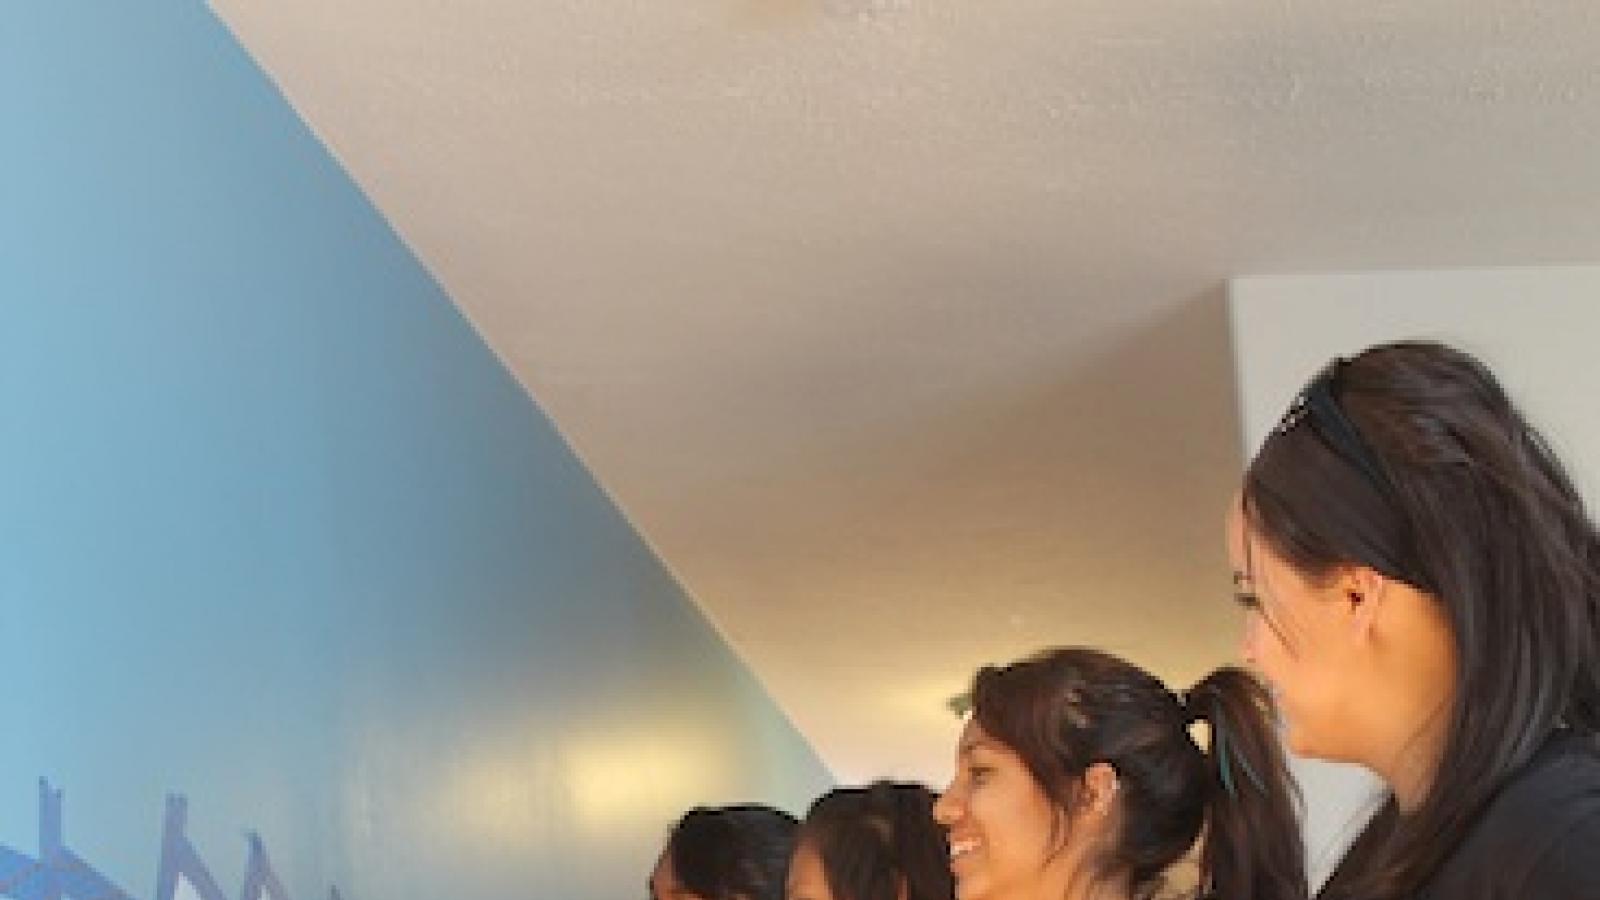 Four young Native American girls in casual clothing paint a mural in blue, yellow, and orange on an office wall